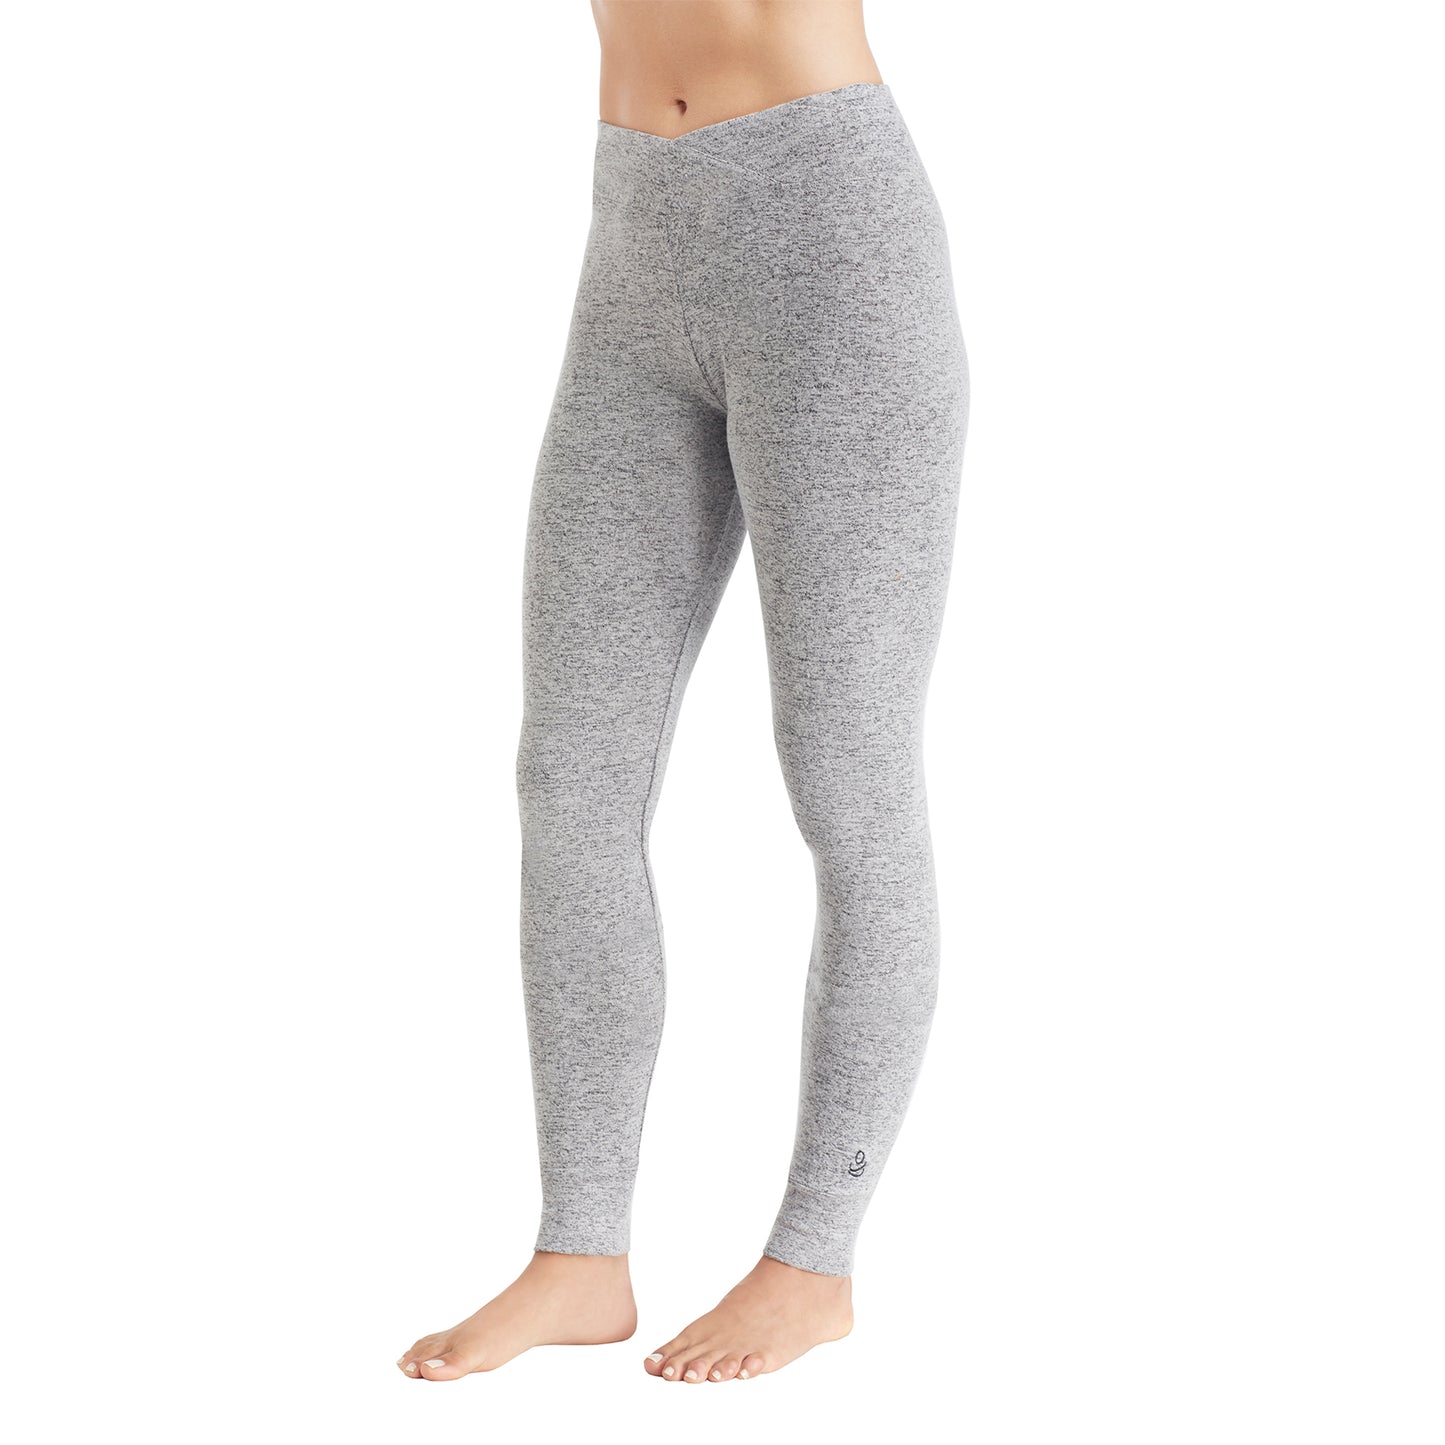 Marled Grey; Model is wearing size S. She is 5’9”, Bust 32”, Waist 25.5”, Hips 36”. @A lady wearing a marled grey legging.